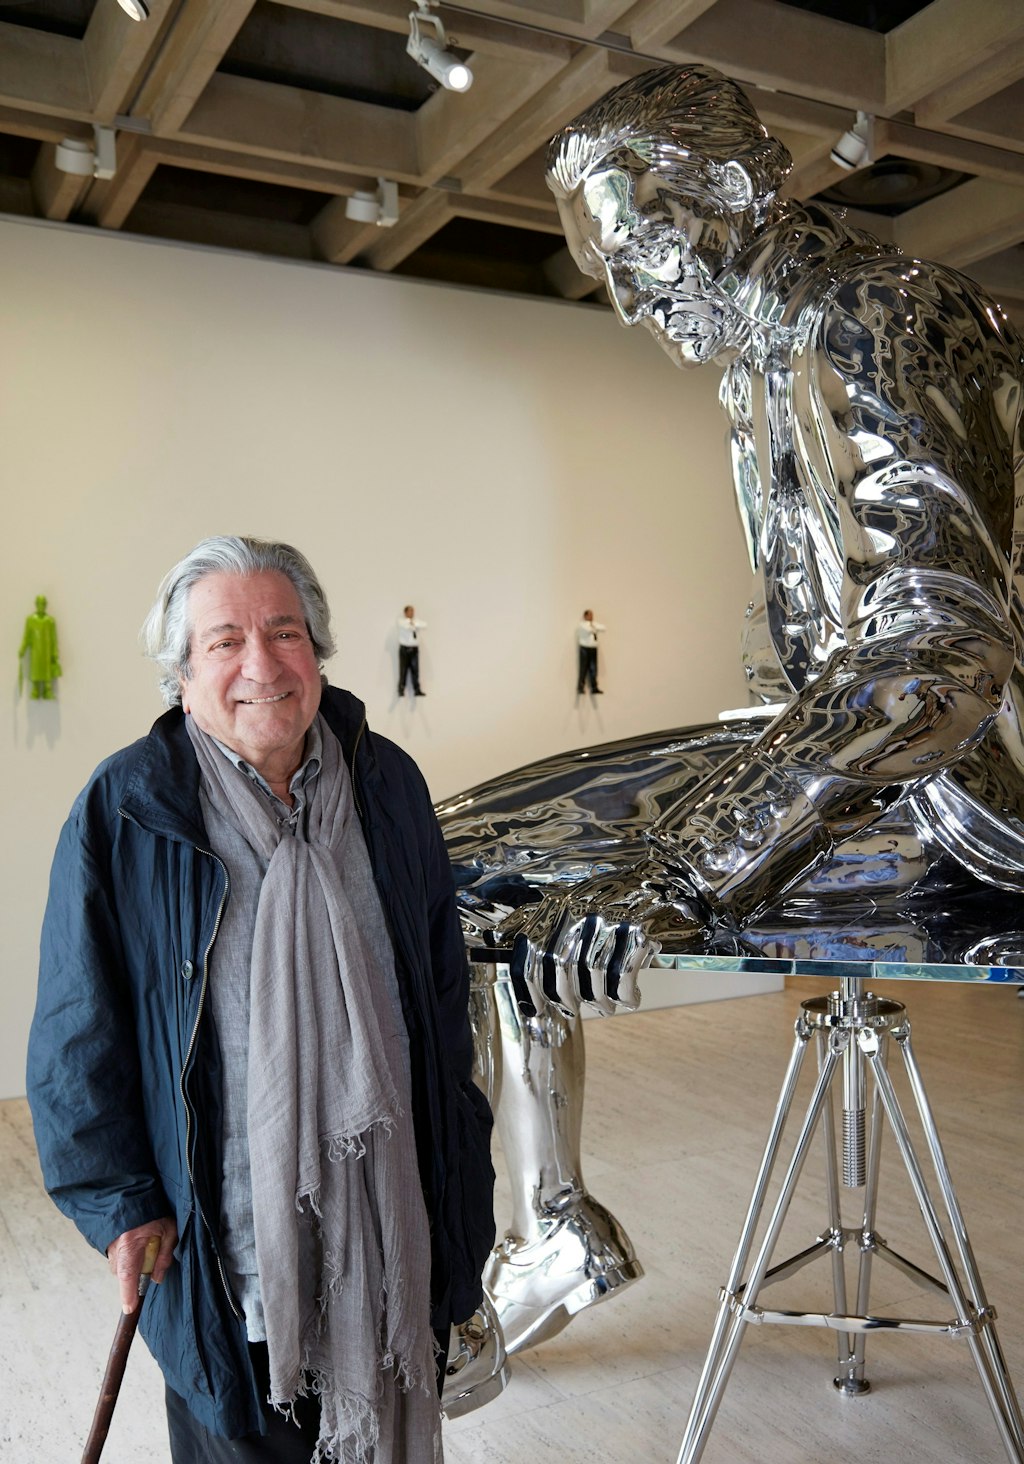 A grey-haired man dressed in a grey scarf and blue jacket leans on a walking stick next to a huge shiny silver statue of a seated figure of explorer James Cook.